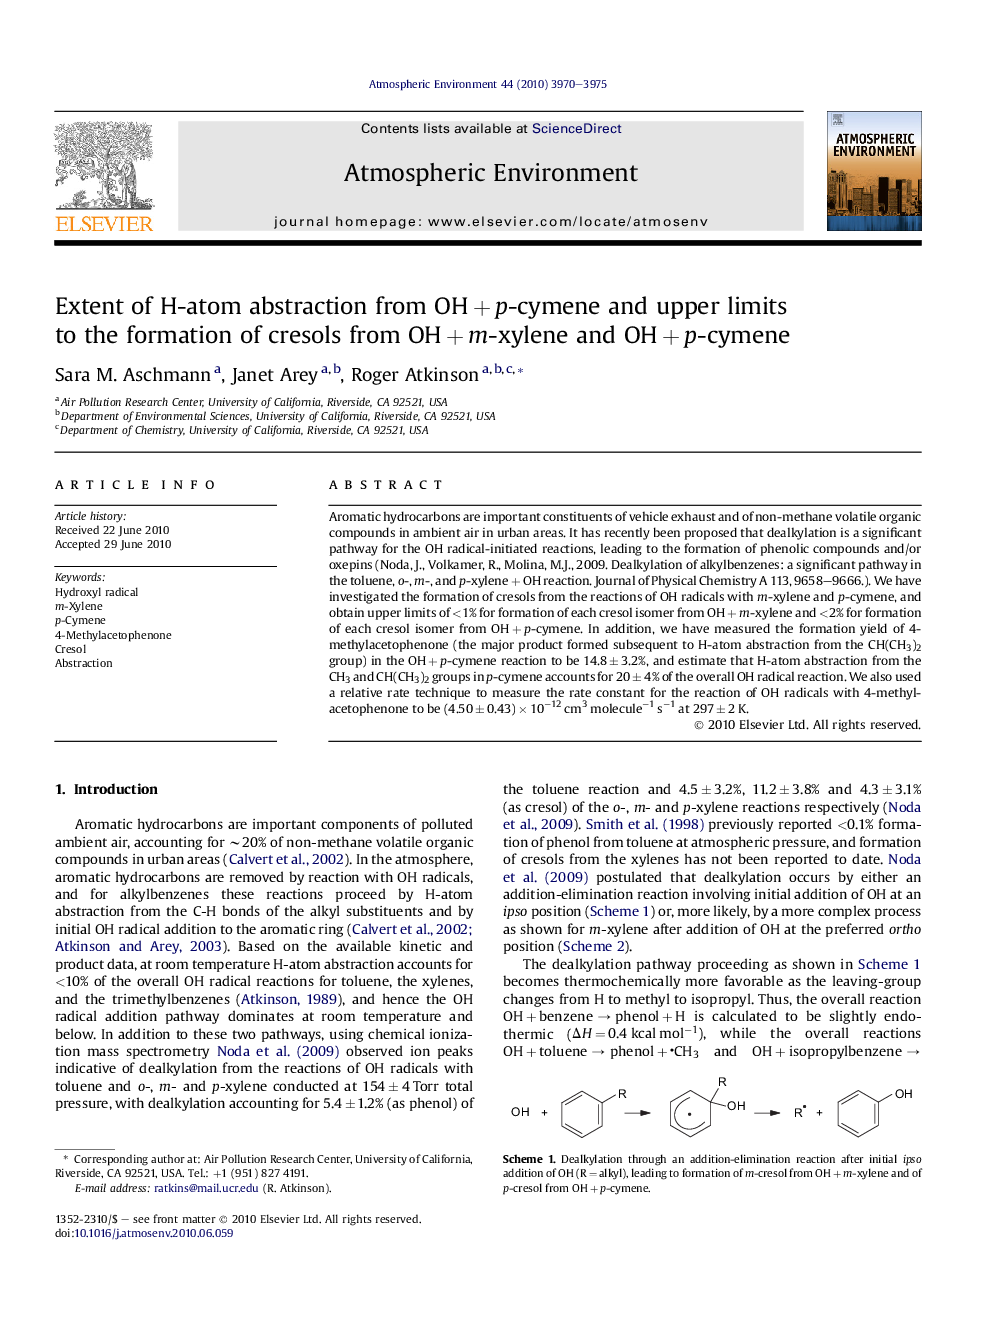 Extent of H-atom abstraction from OH + p-cymene and upper limits to the formation of cresols from OH + m-xylene and OH + p-cymene